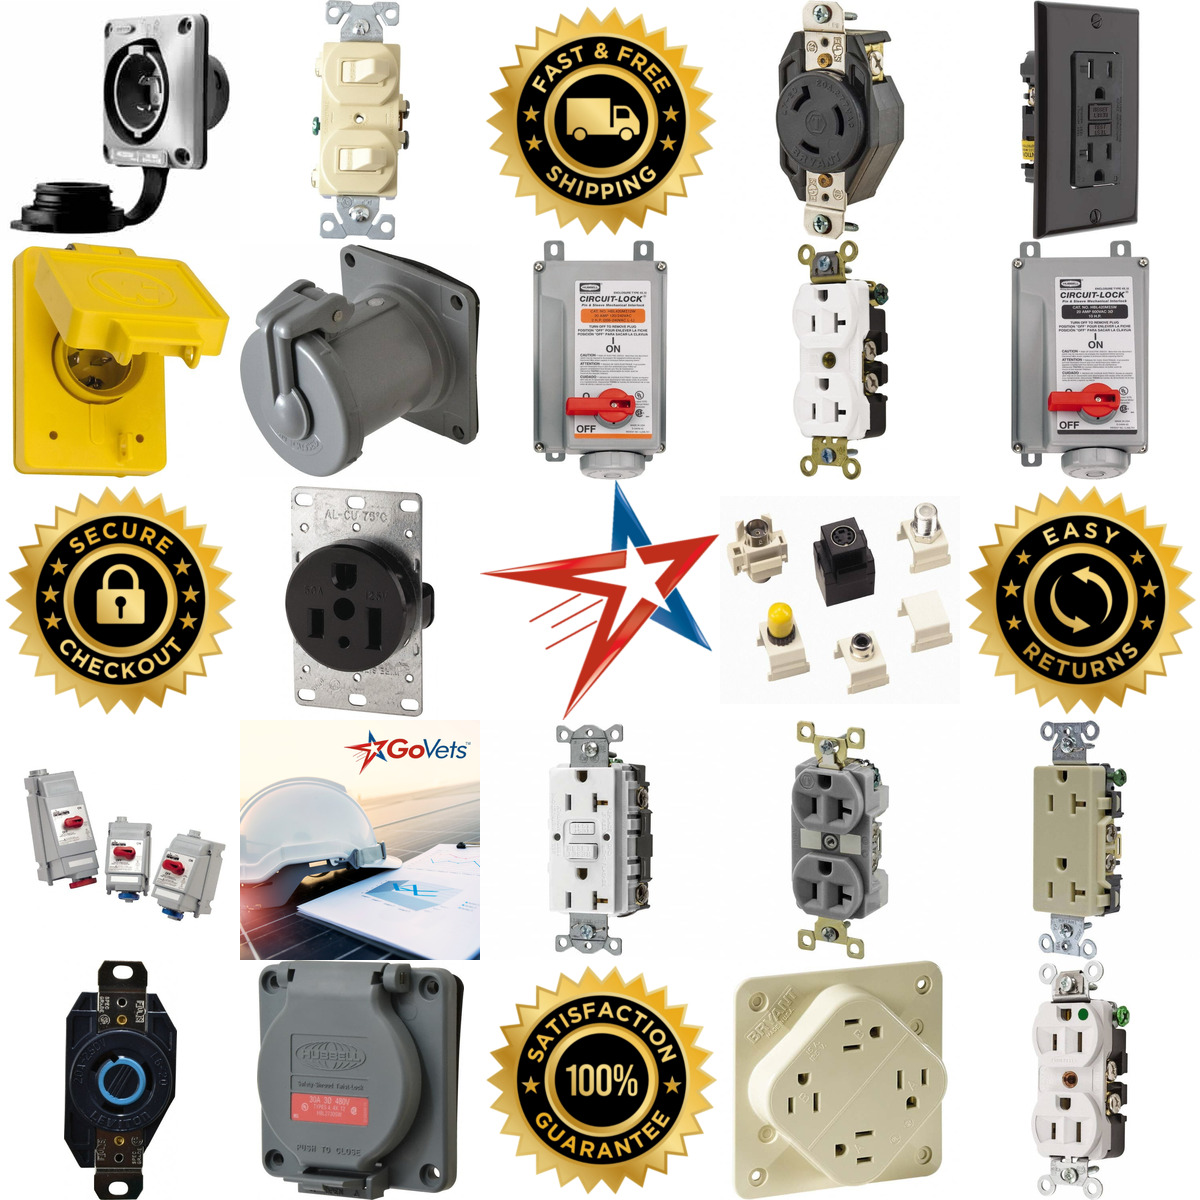 A selection of Electrical Receptacles products on GoVets